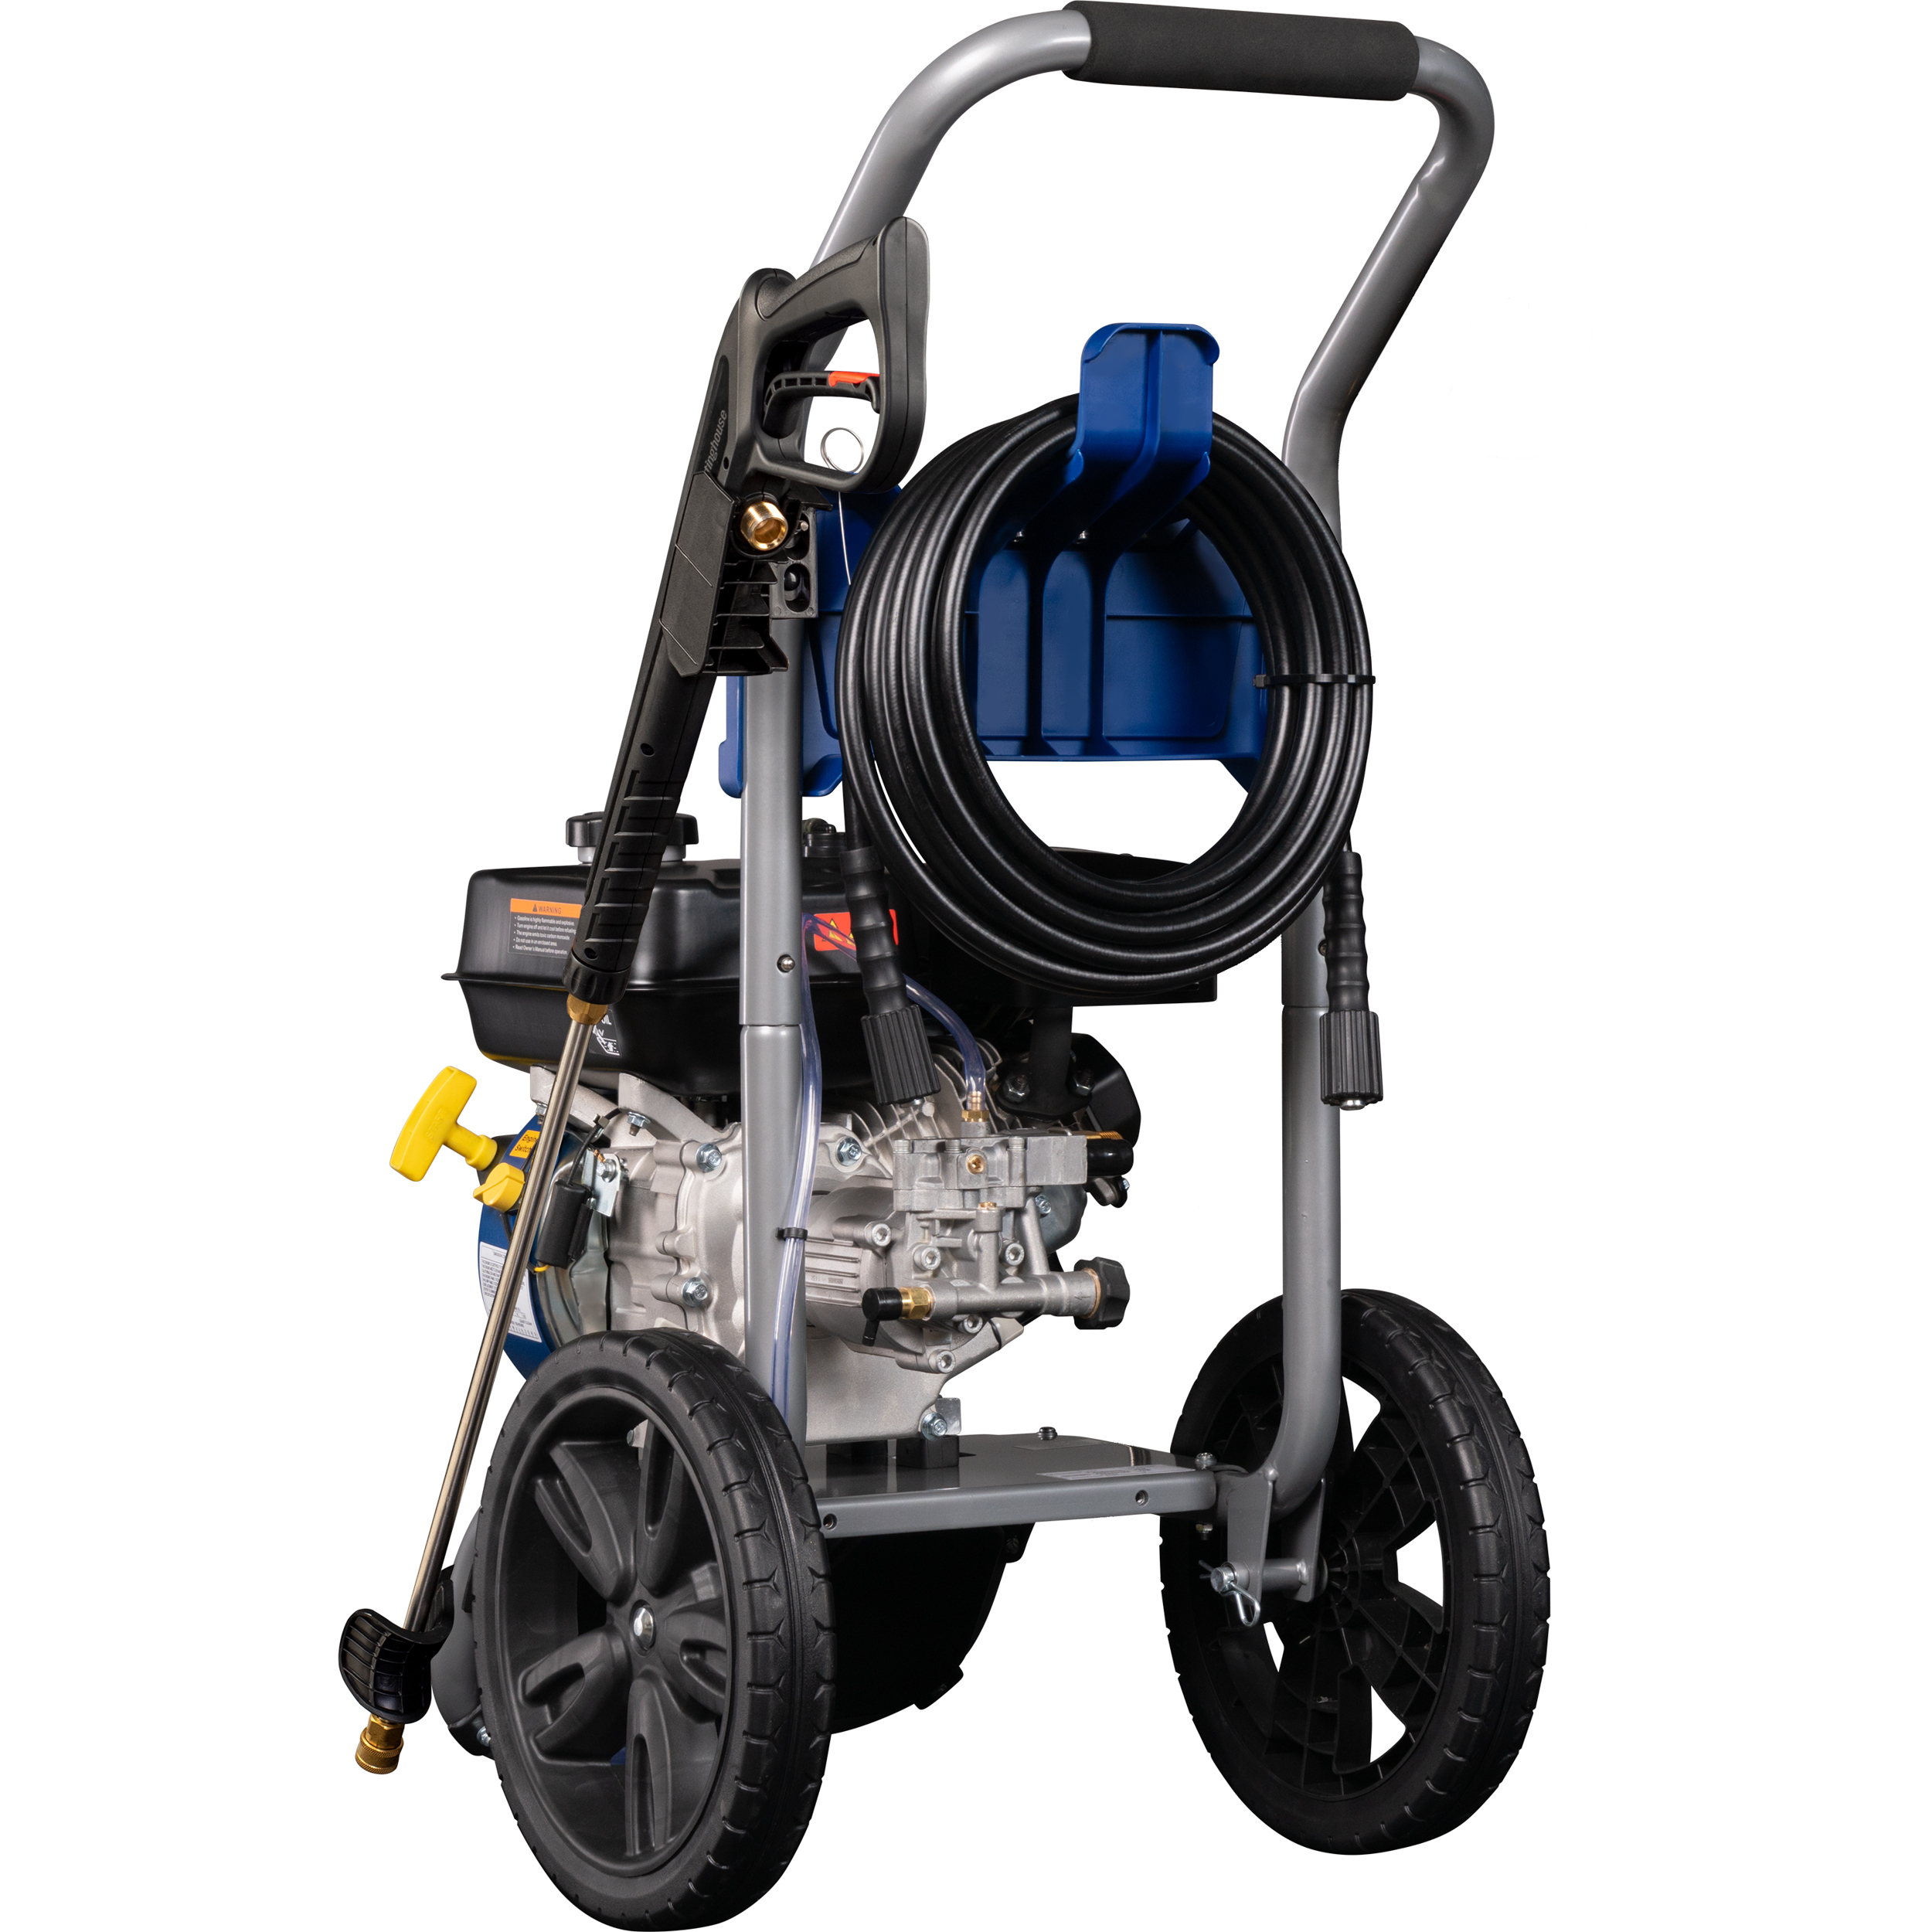 Westinghouse 3200-PSI, 2.5-GPM Gas Pressure Washer with 5 Nozzles & Soap Tank, 63 lbs. - image 11 of 13